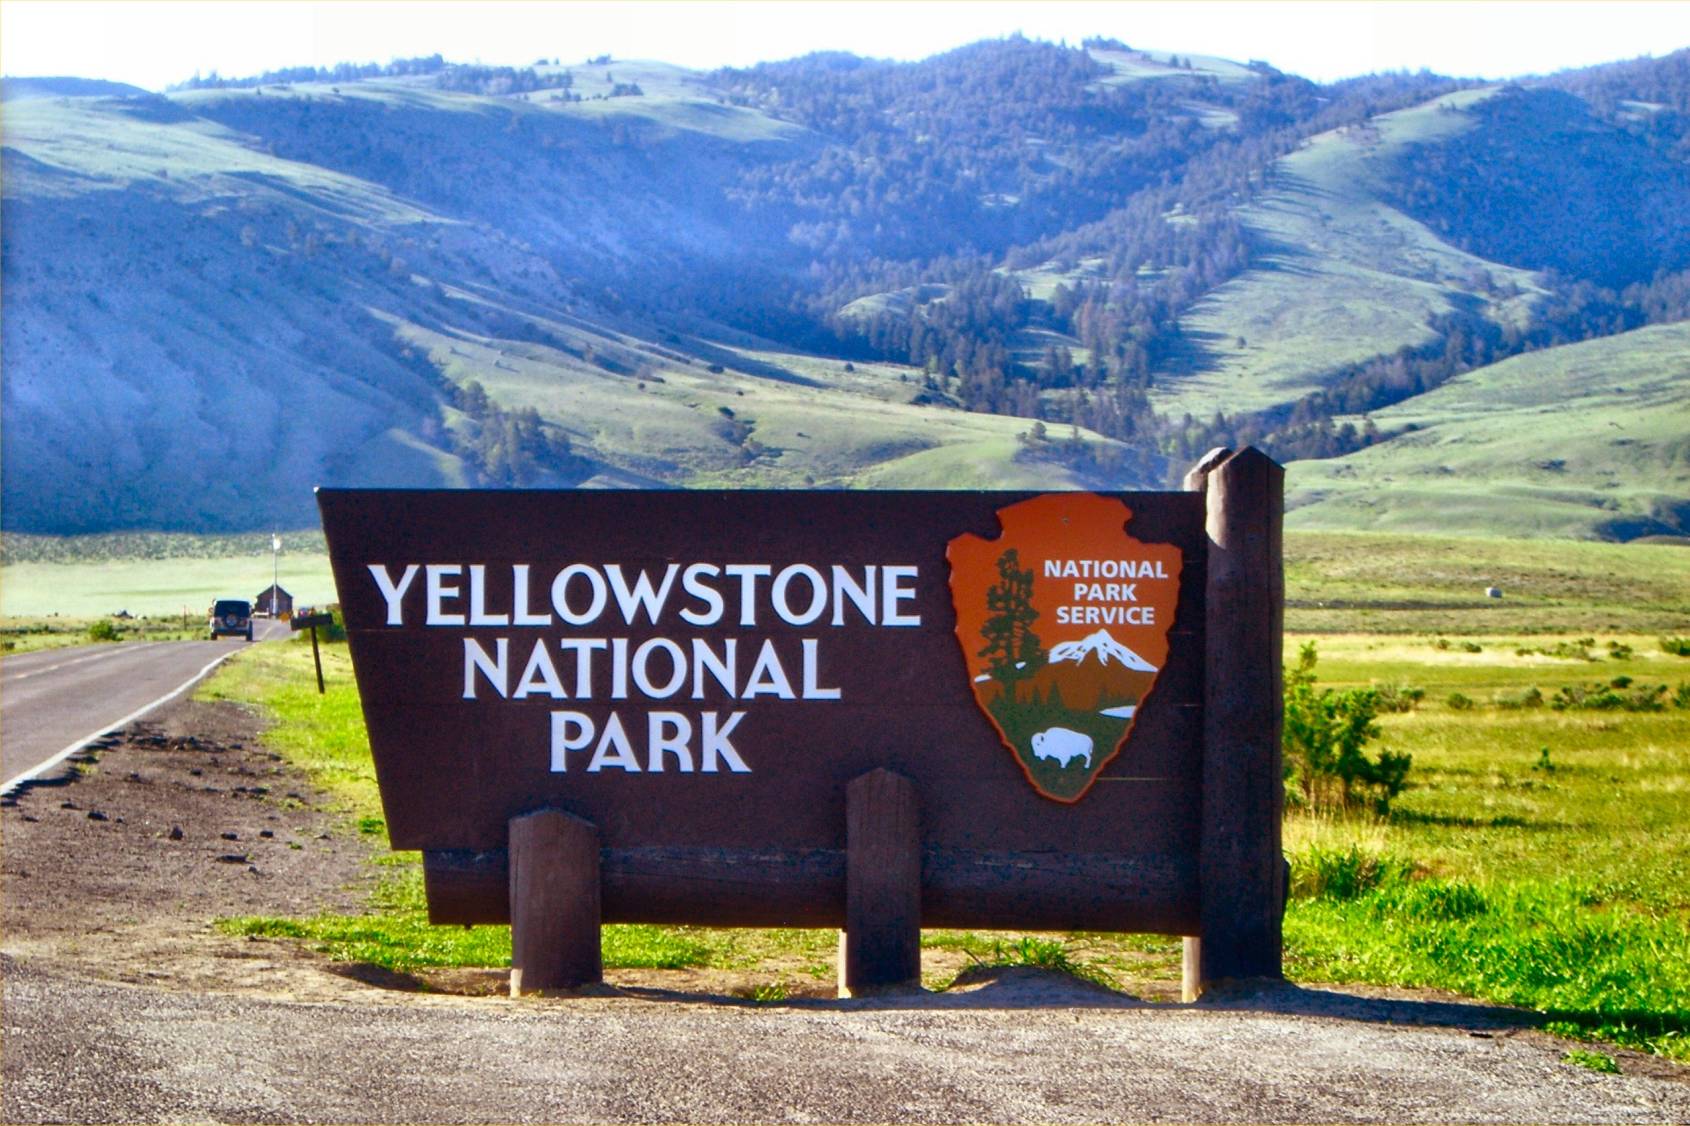 are dogs allowed at yellowstone national park